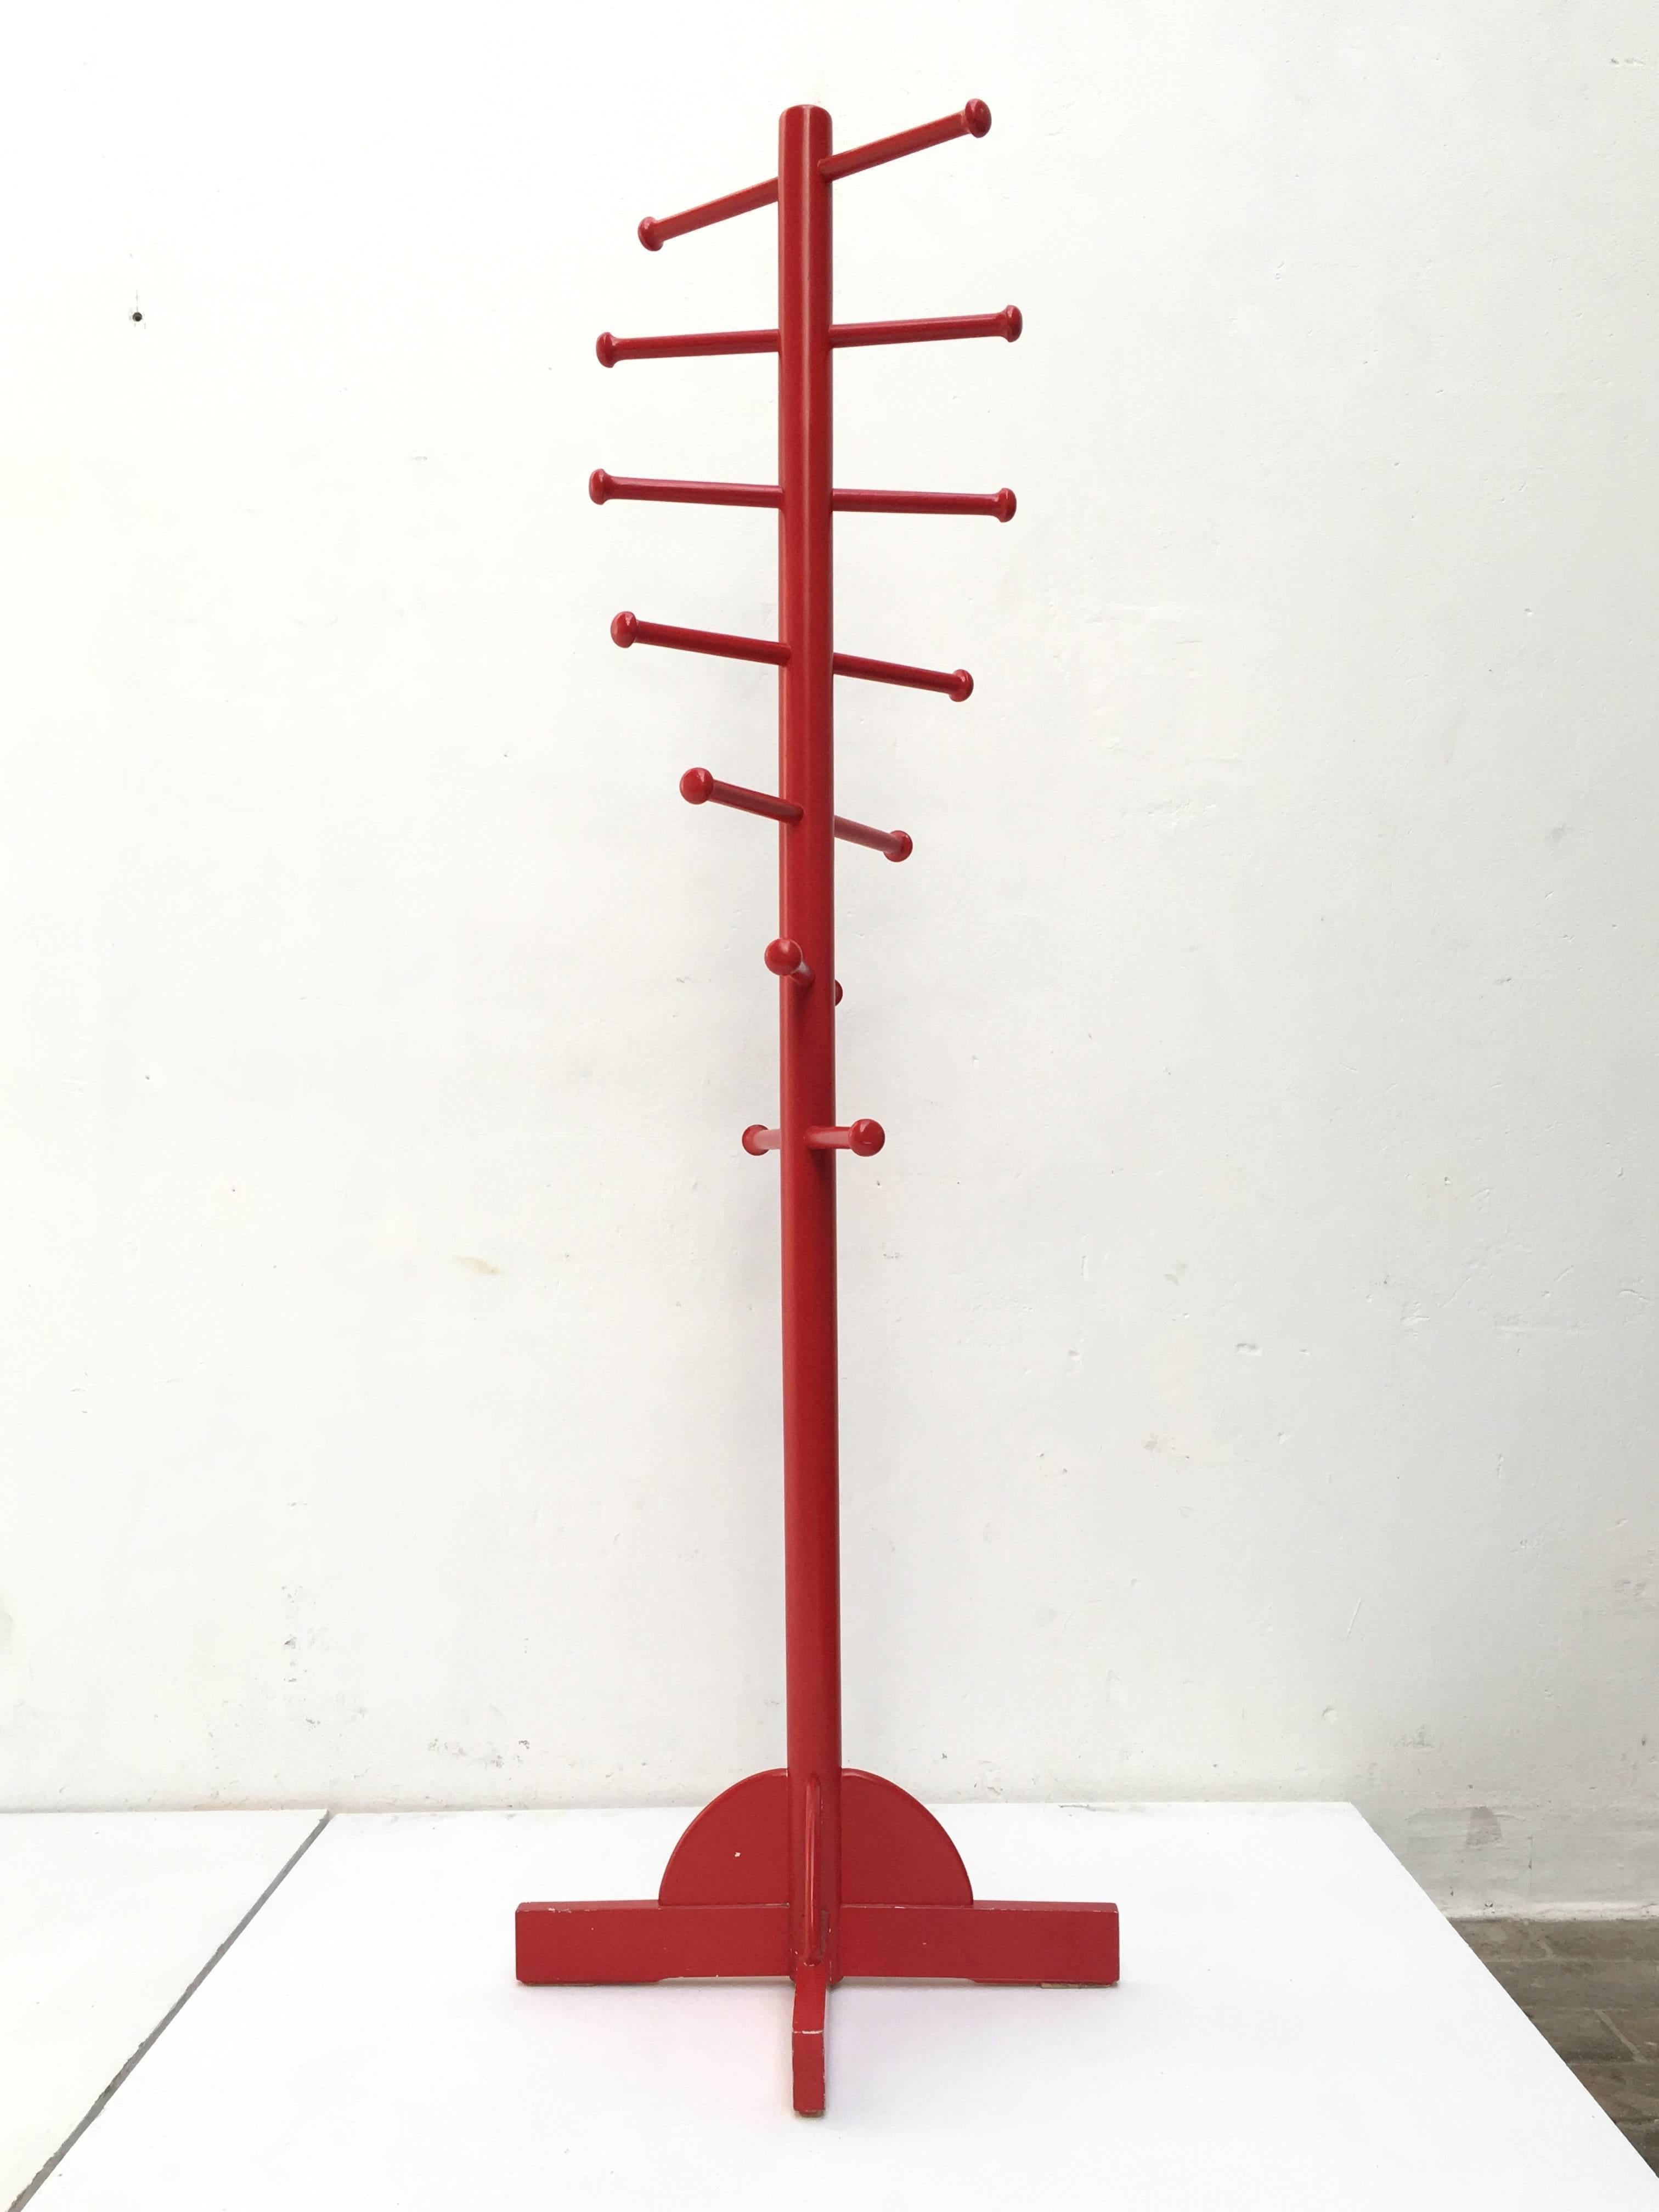 Lovely example of Sottsass' iconic coat stand finished in the original red lacquer over a cascading spiraling form wooden structure.

Sergio Cammilli's 'Poltronova' were at the forefront of cutting edge radical Italian design during this highly